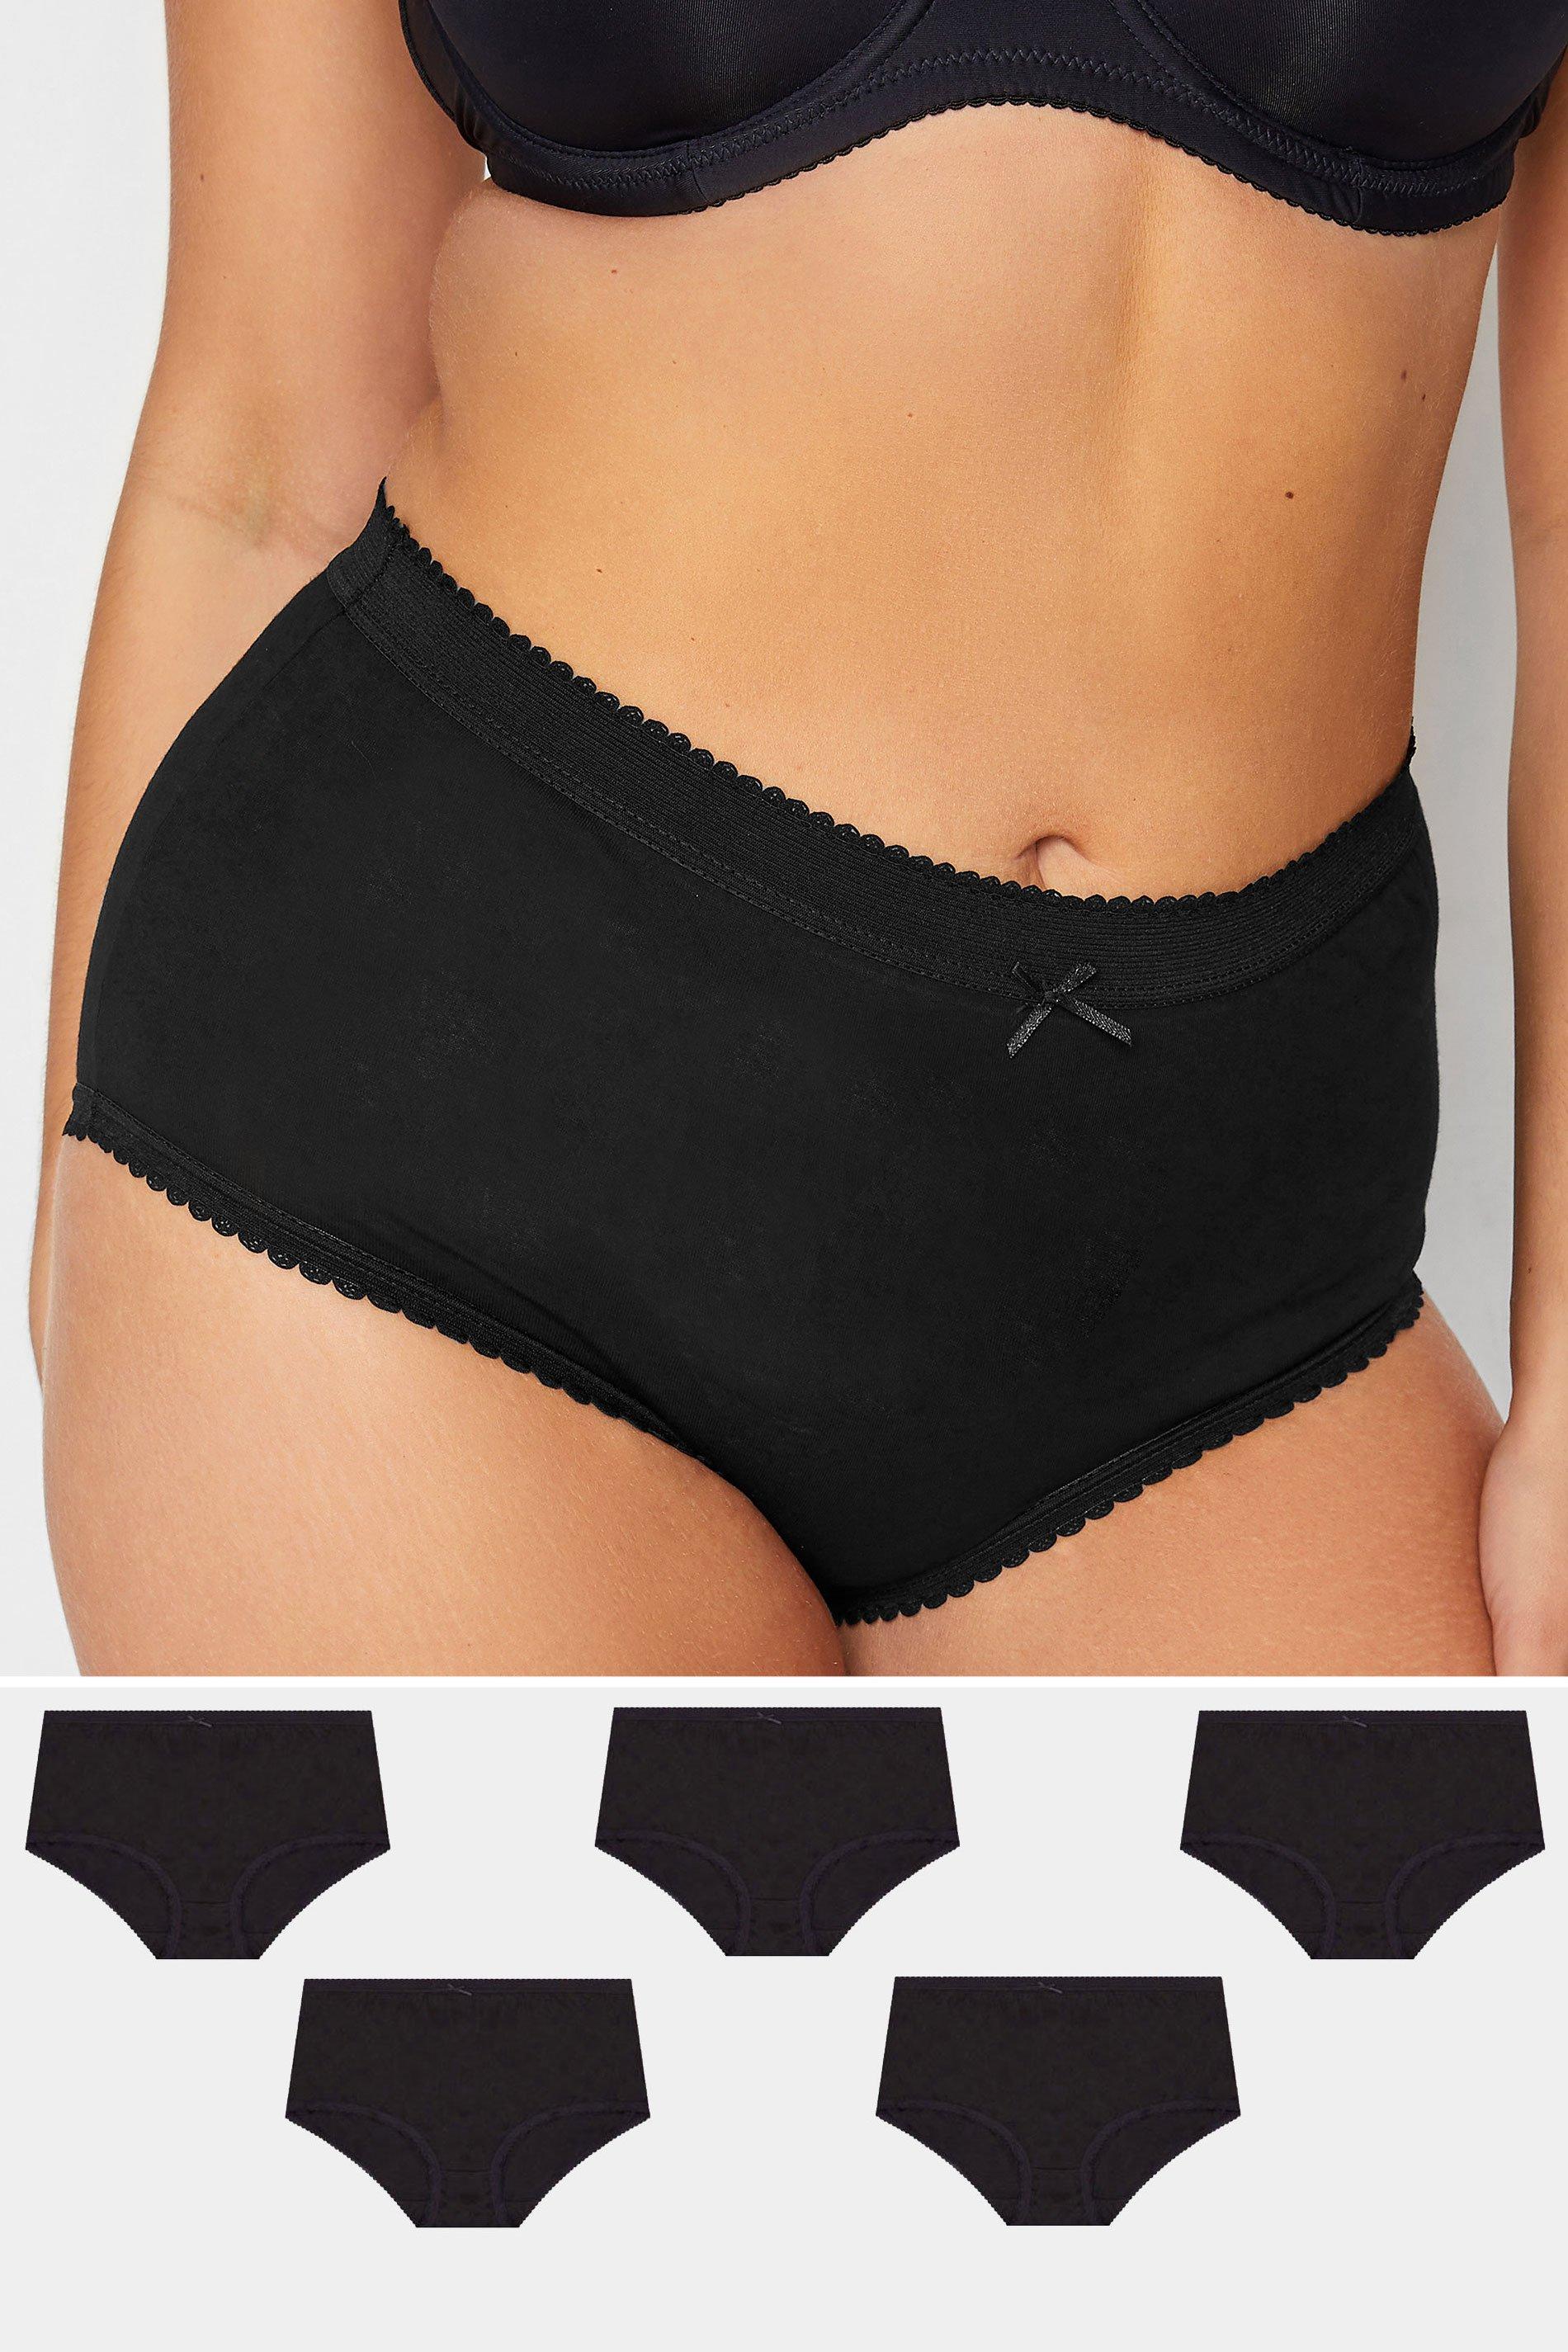 5 Pack No-VPL Scalloped Briefs at Cotton Traders